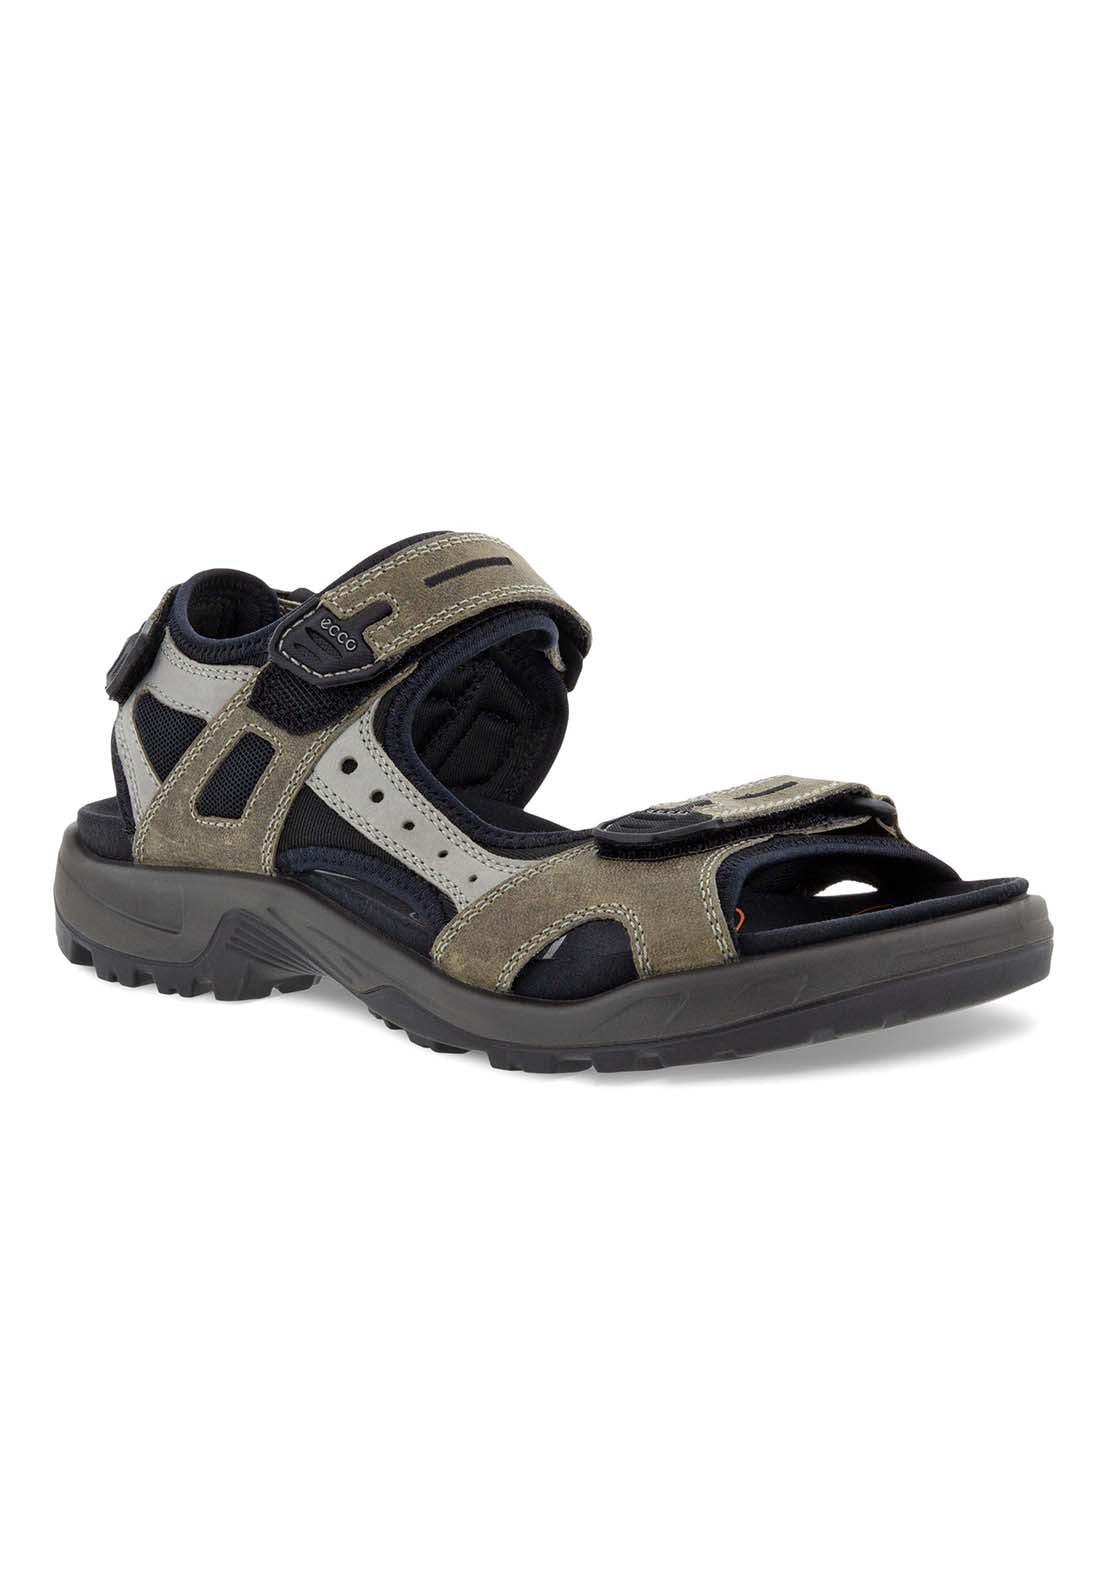 Ecco Offroad Sandal 1 Shaws Department Stores